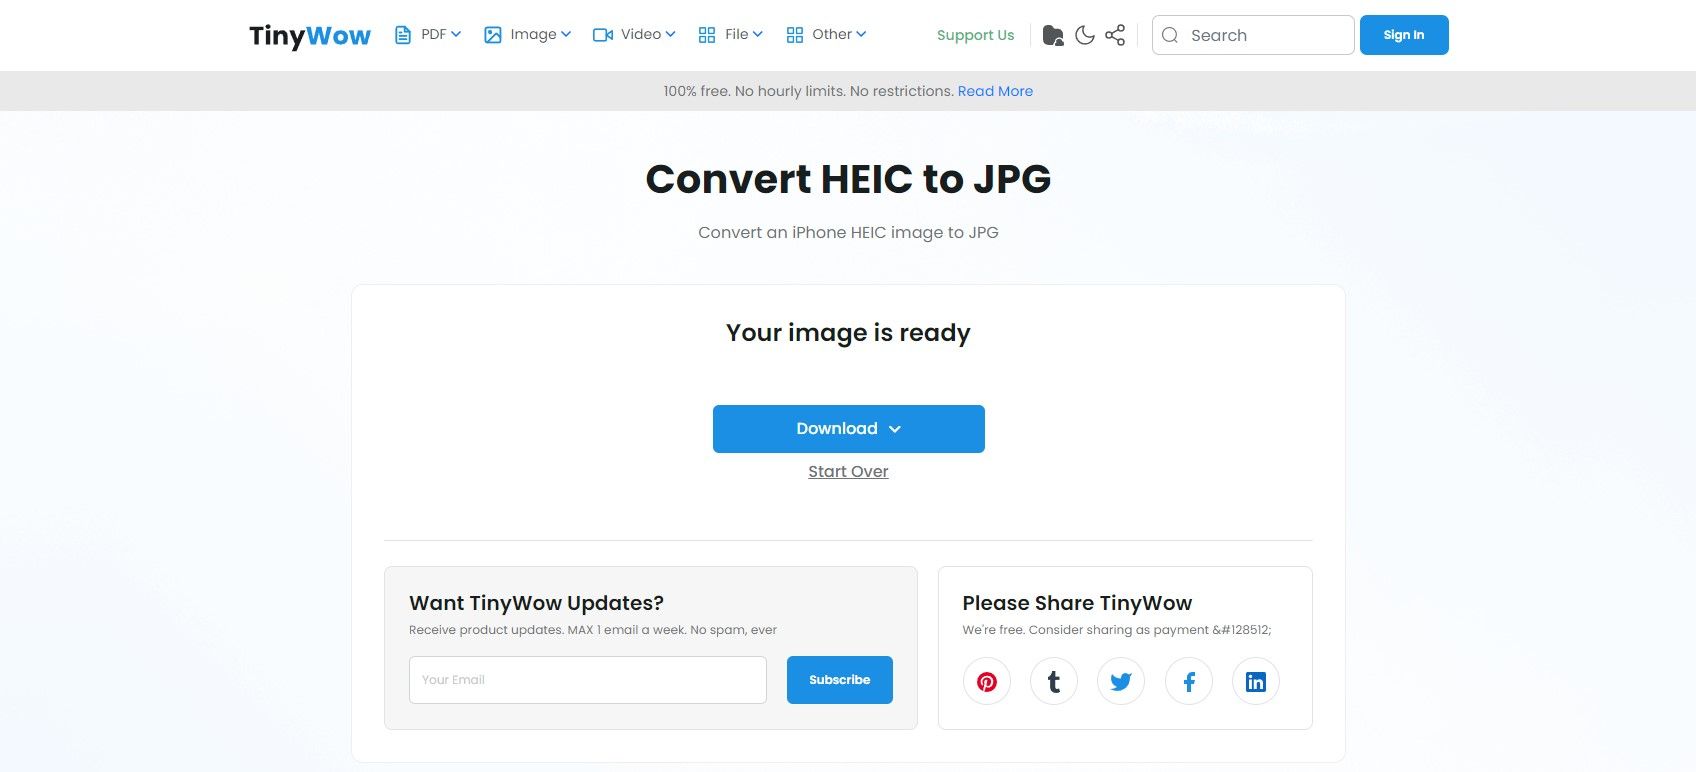 tinywow heic to jpg file download